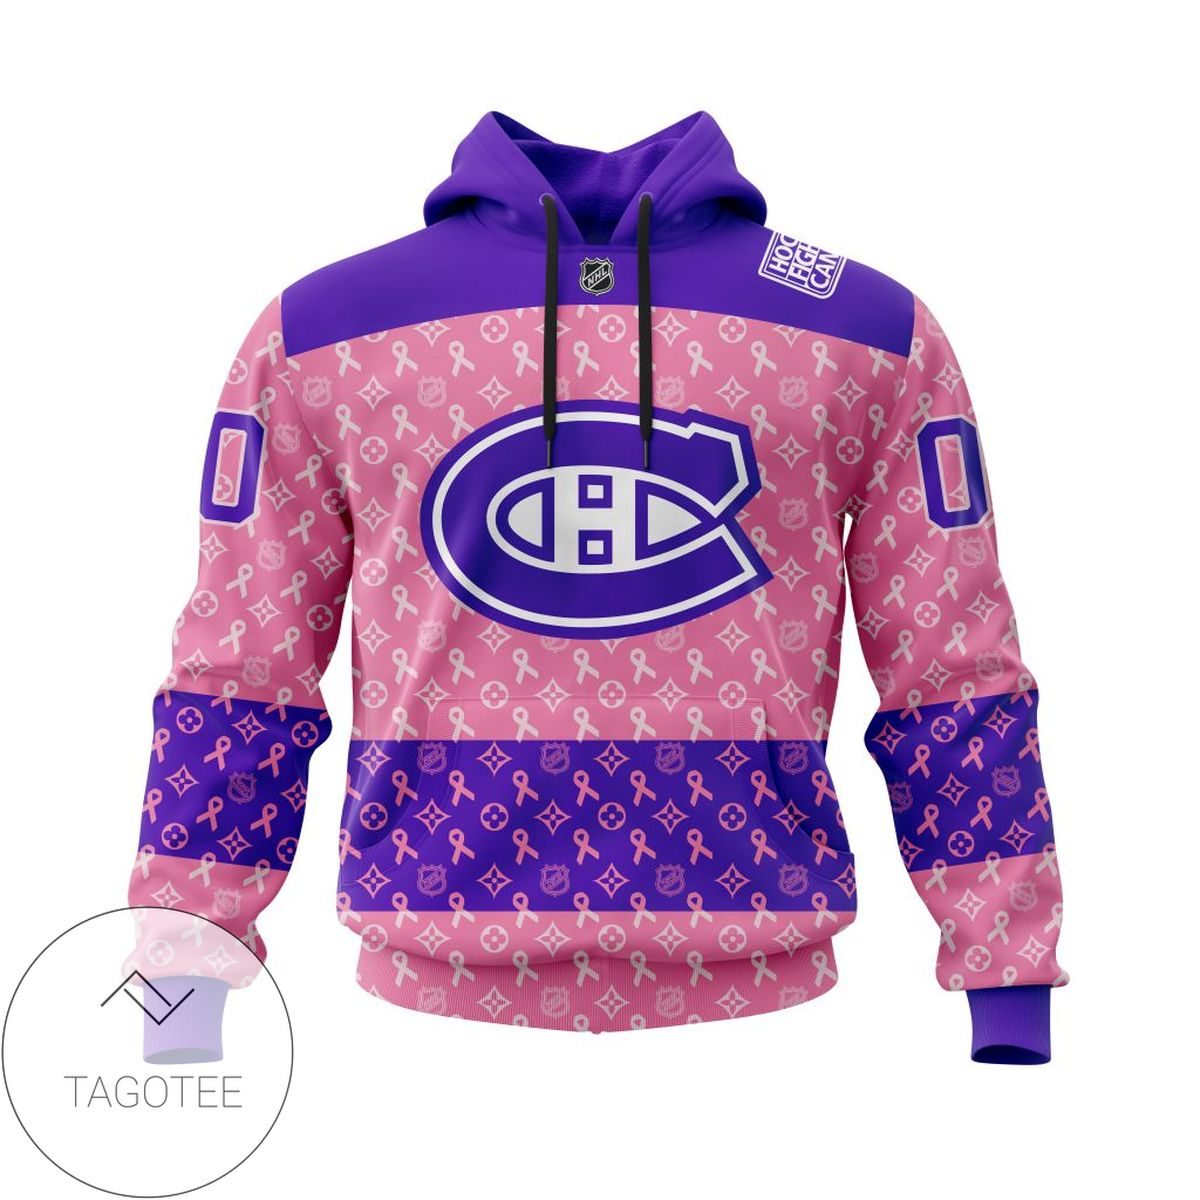 Personalized NHL Montreal CanadiensPink Ribbon Fights Cancer Jersey